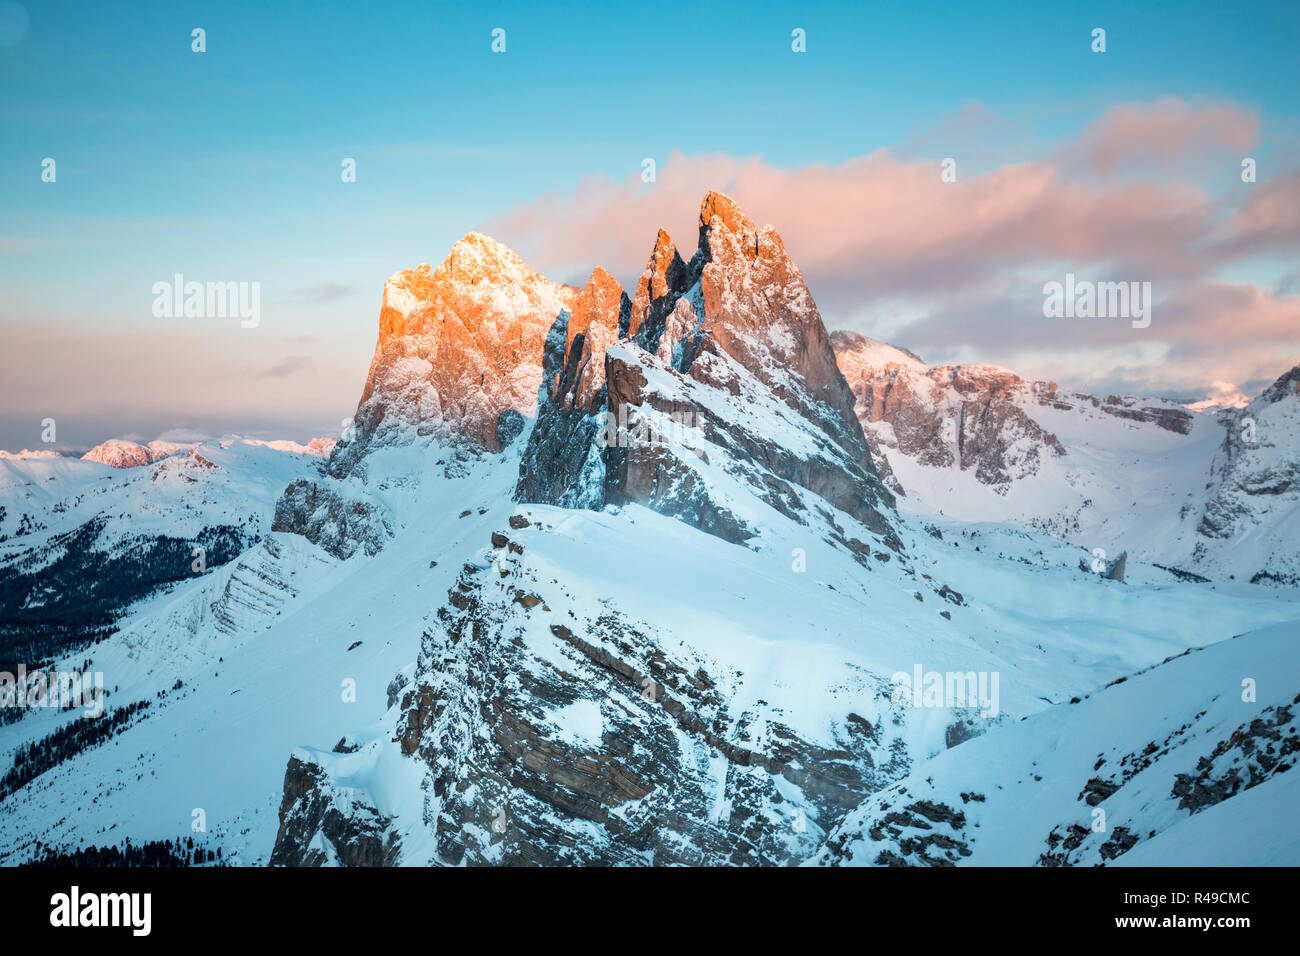 Classic view of famous Seceda mountain peaks in the Dolomites illuminated in beautiful evening light at sunset in winter, South Tyrol, Italy Stock Photo